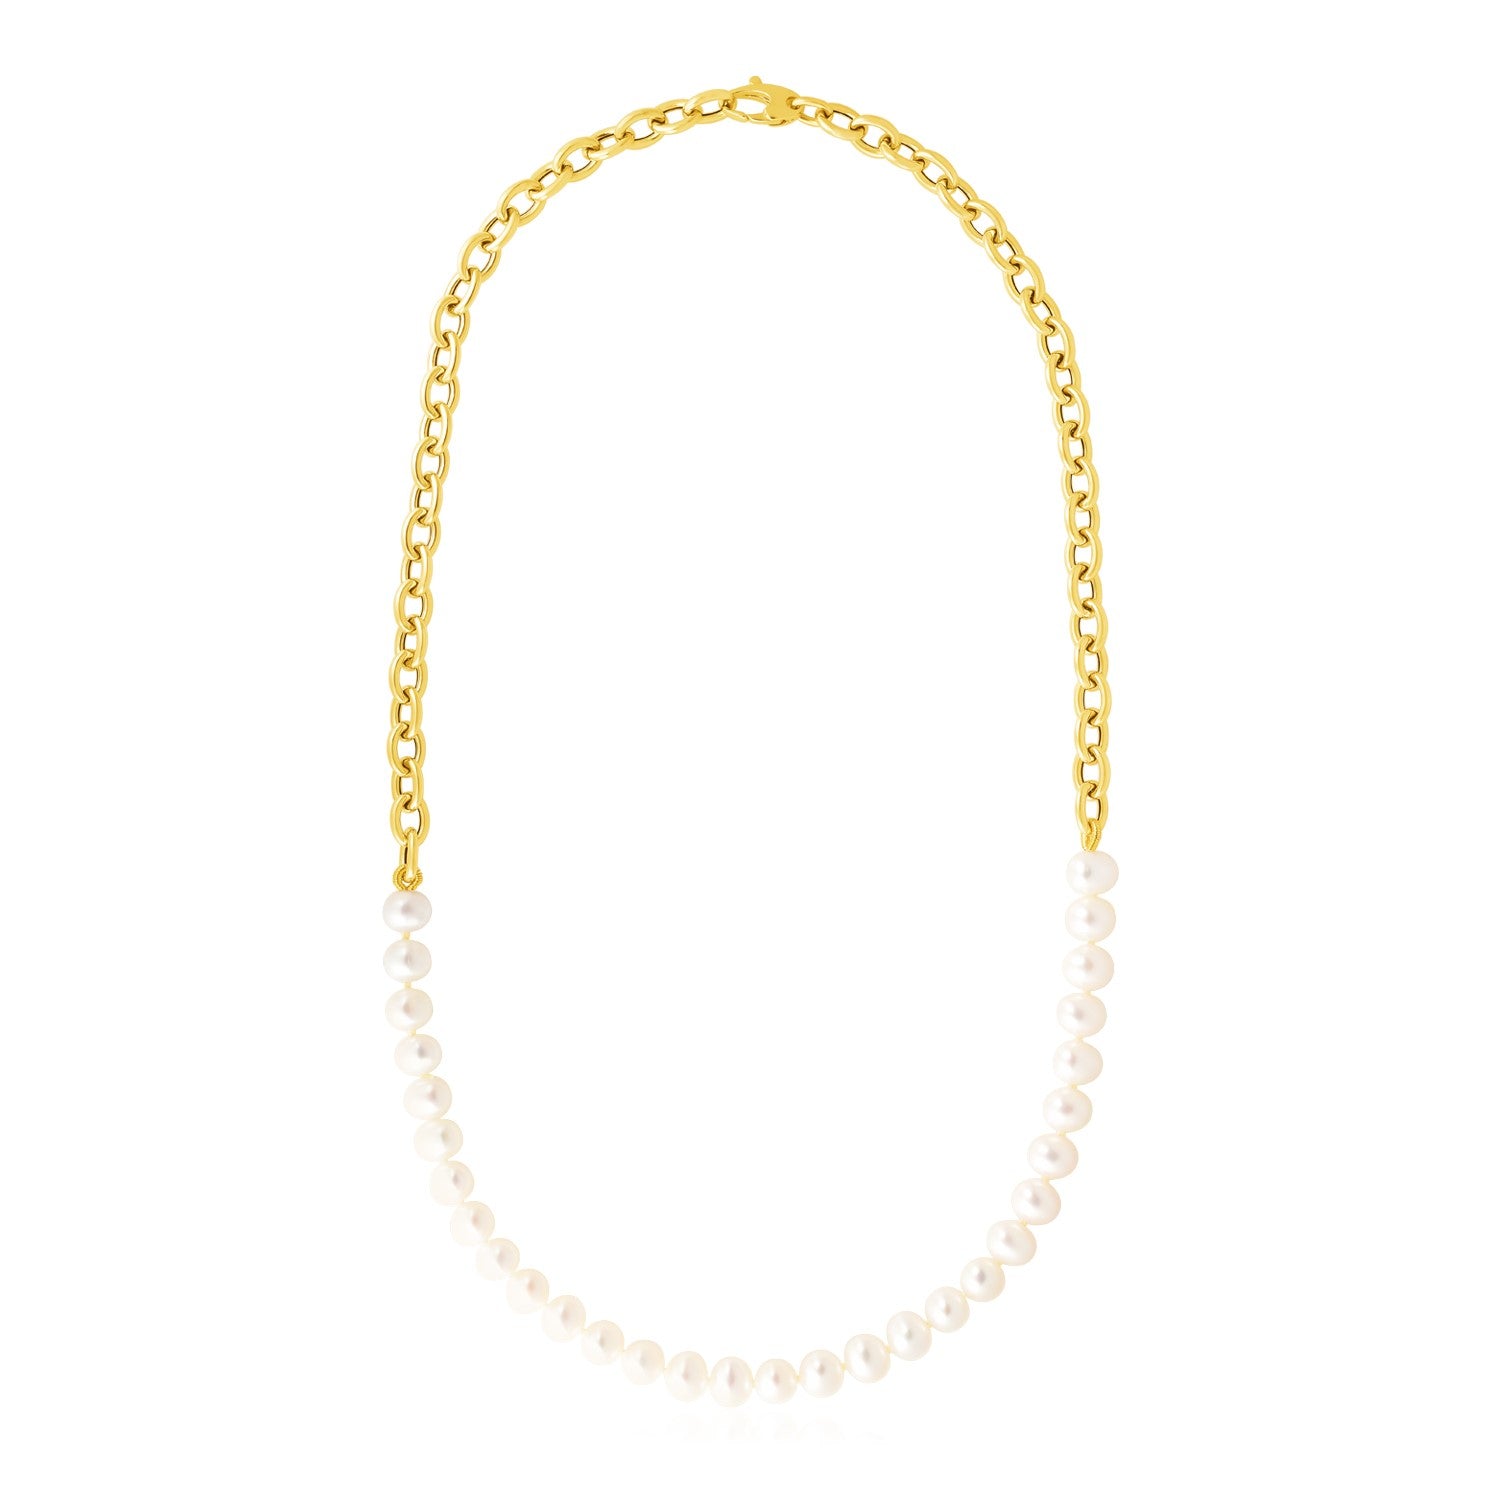 14k Yellow Gold Oval Chain Necklace with Pearls